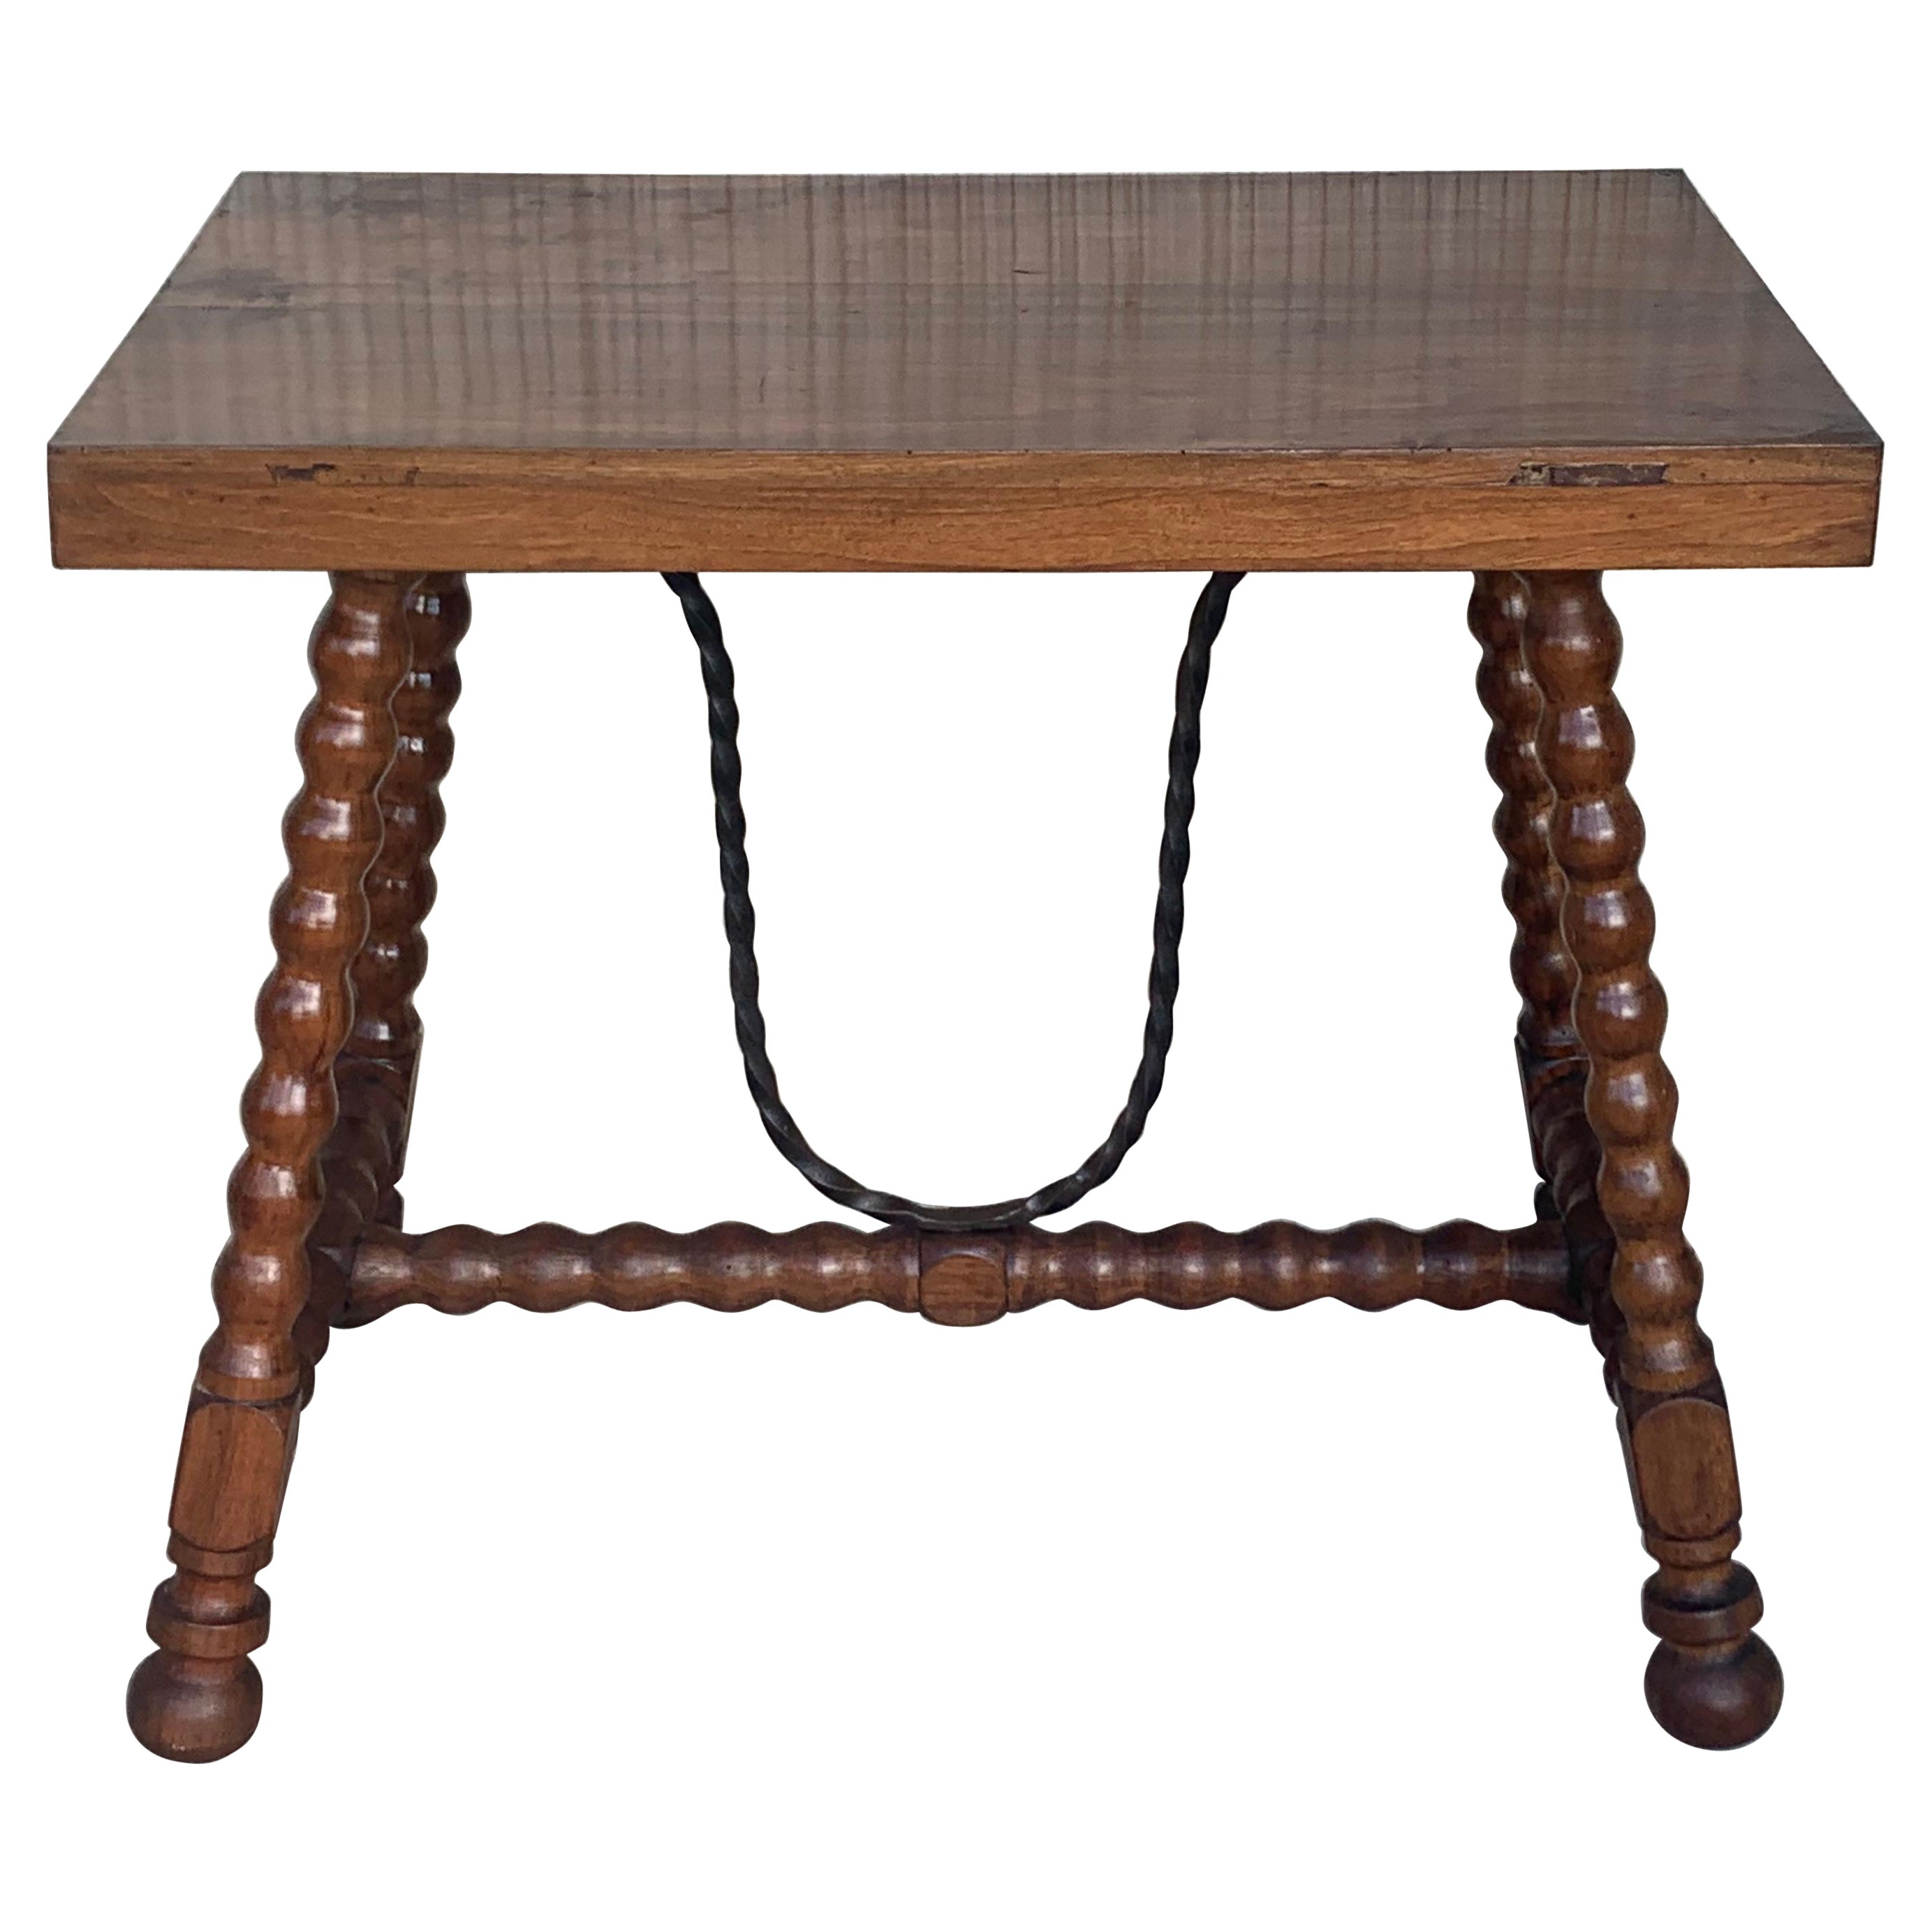 19th Spanish Walnut Side Table with Lyre Legs, Flat Top and Iron Stretcher